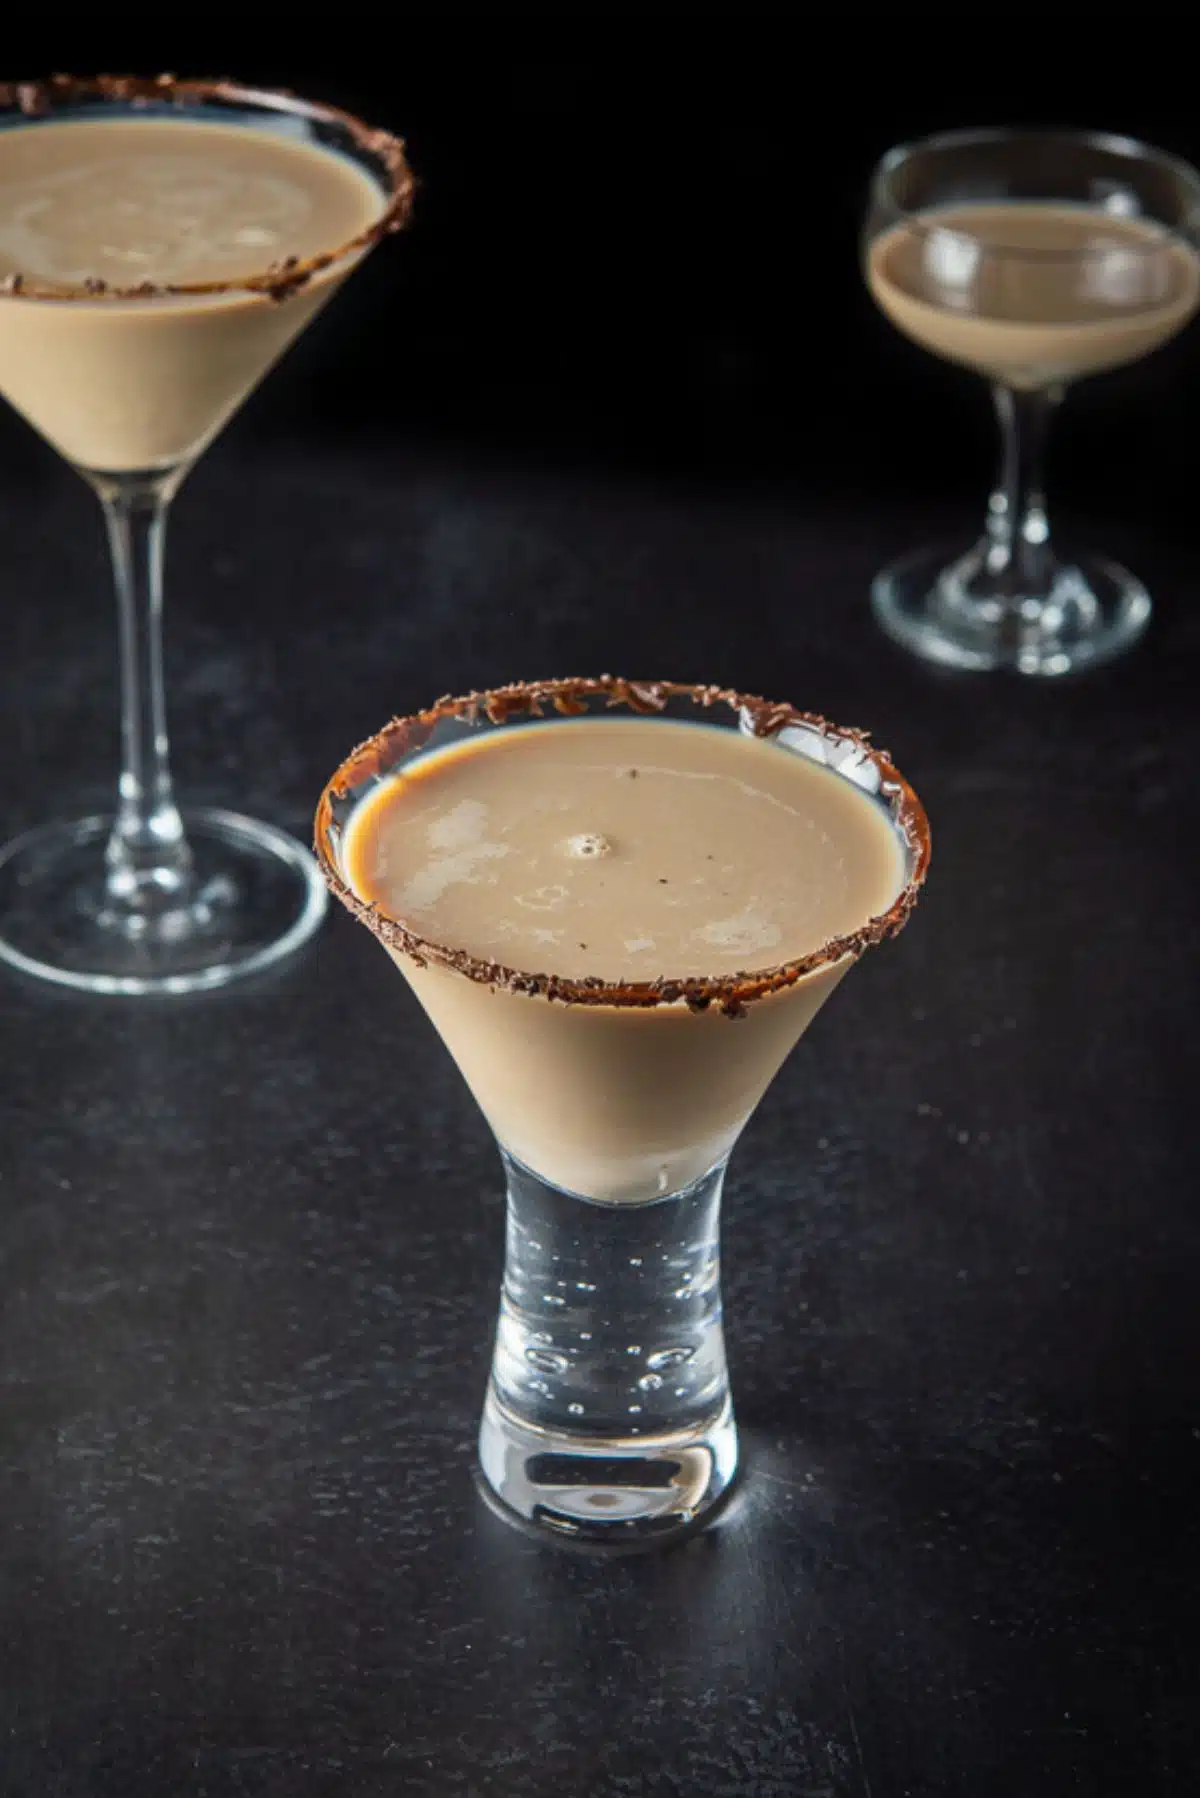 The short glass with chocolate martini in it in front of two other filled glasses